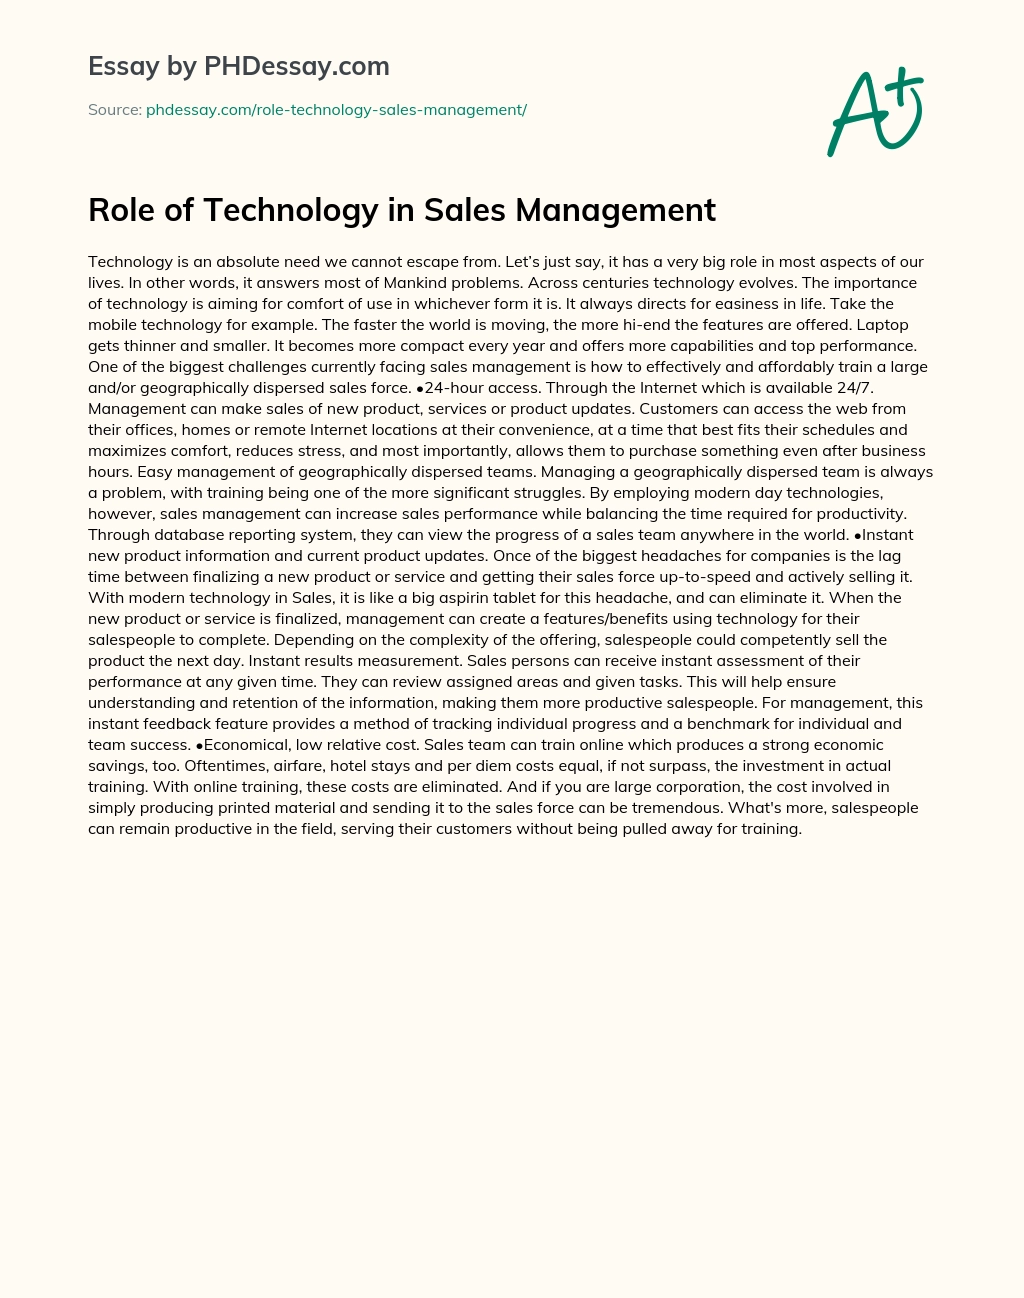 Role of Technology in Sales Management essay